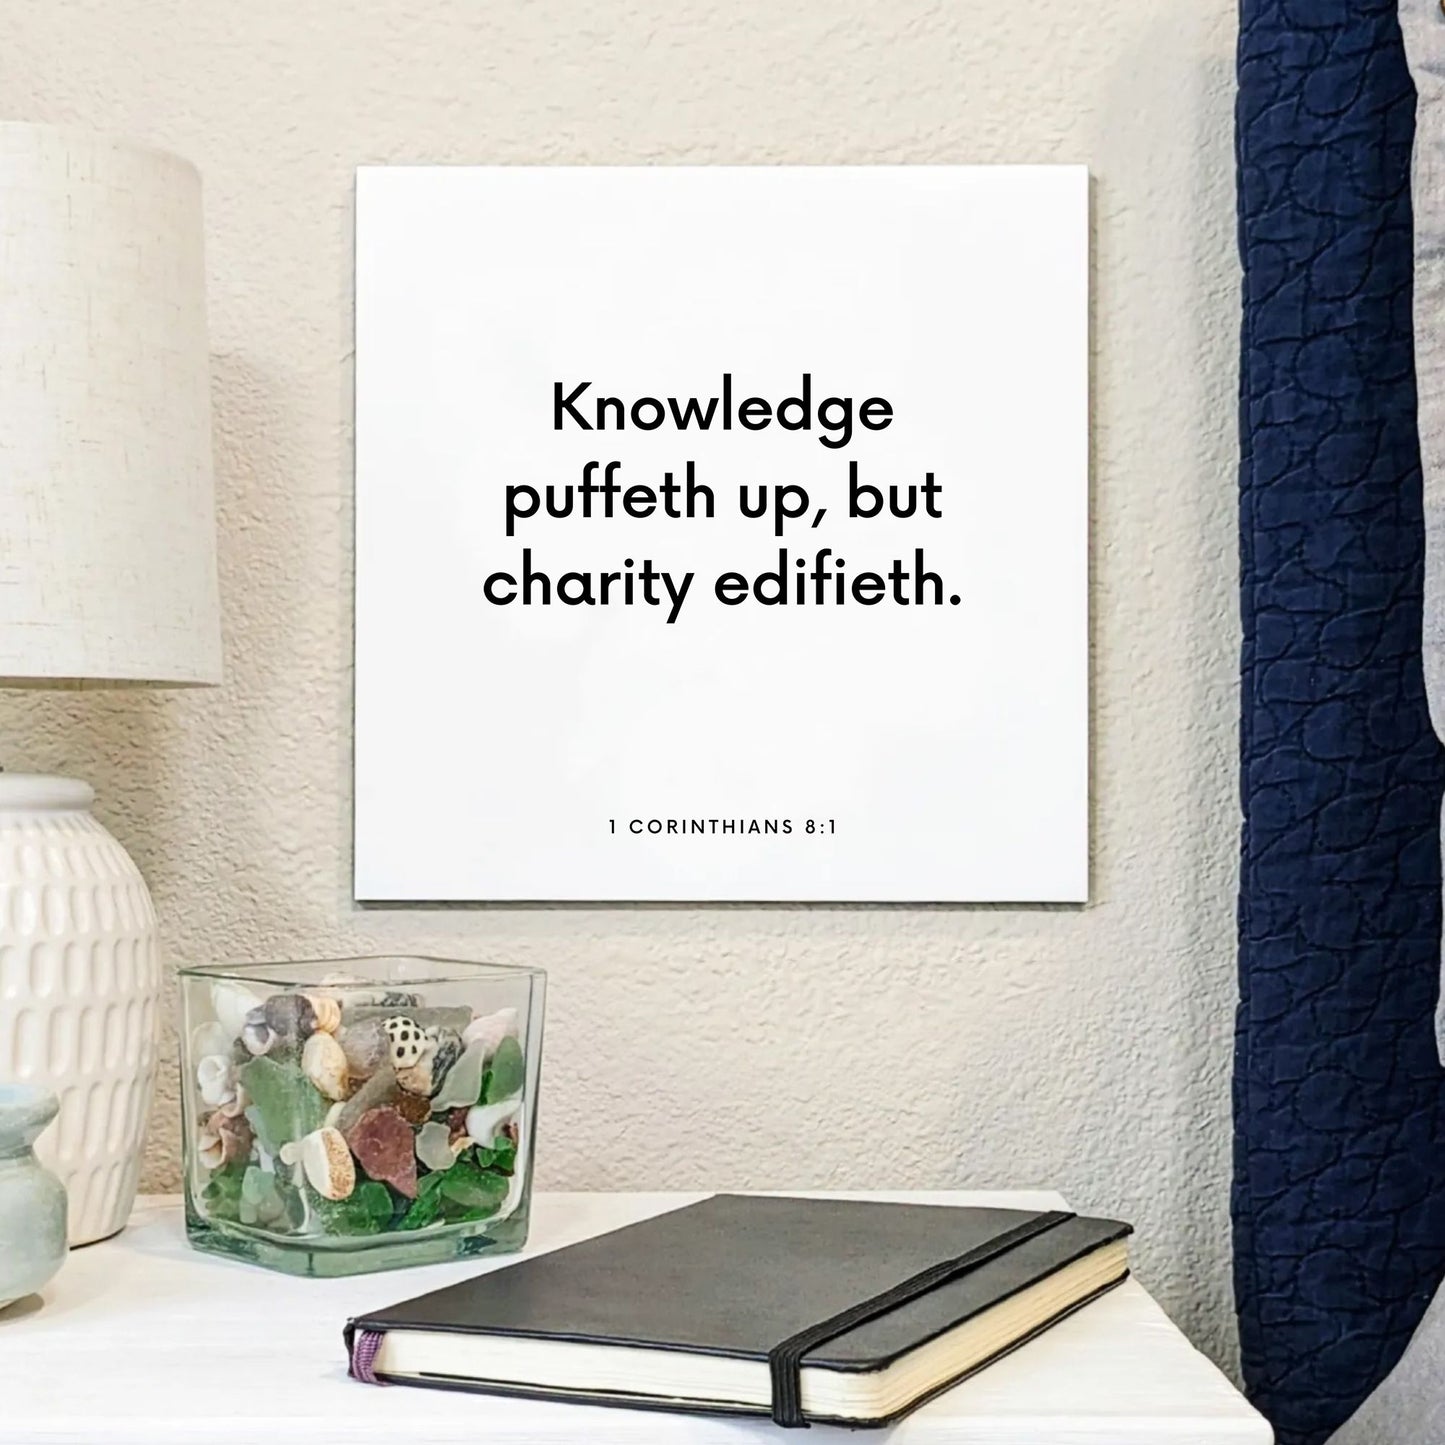 Bedside mouting of the scripture tile for 1 Corinthians 8:1 - "Knowledge puffeth up, but charity edifieth"